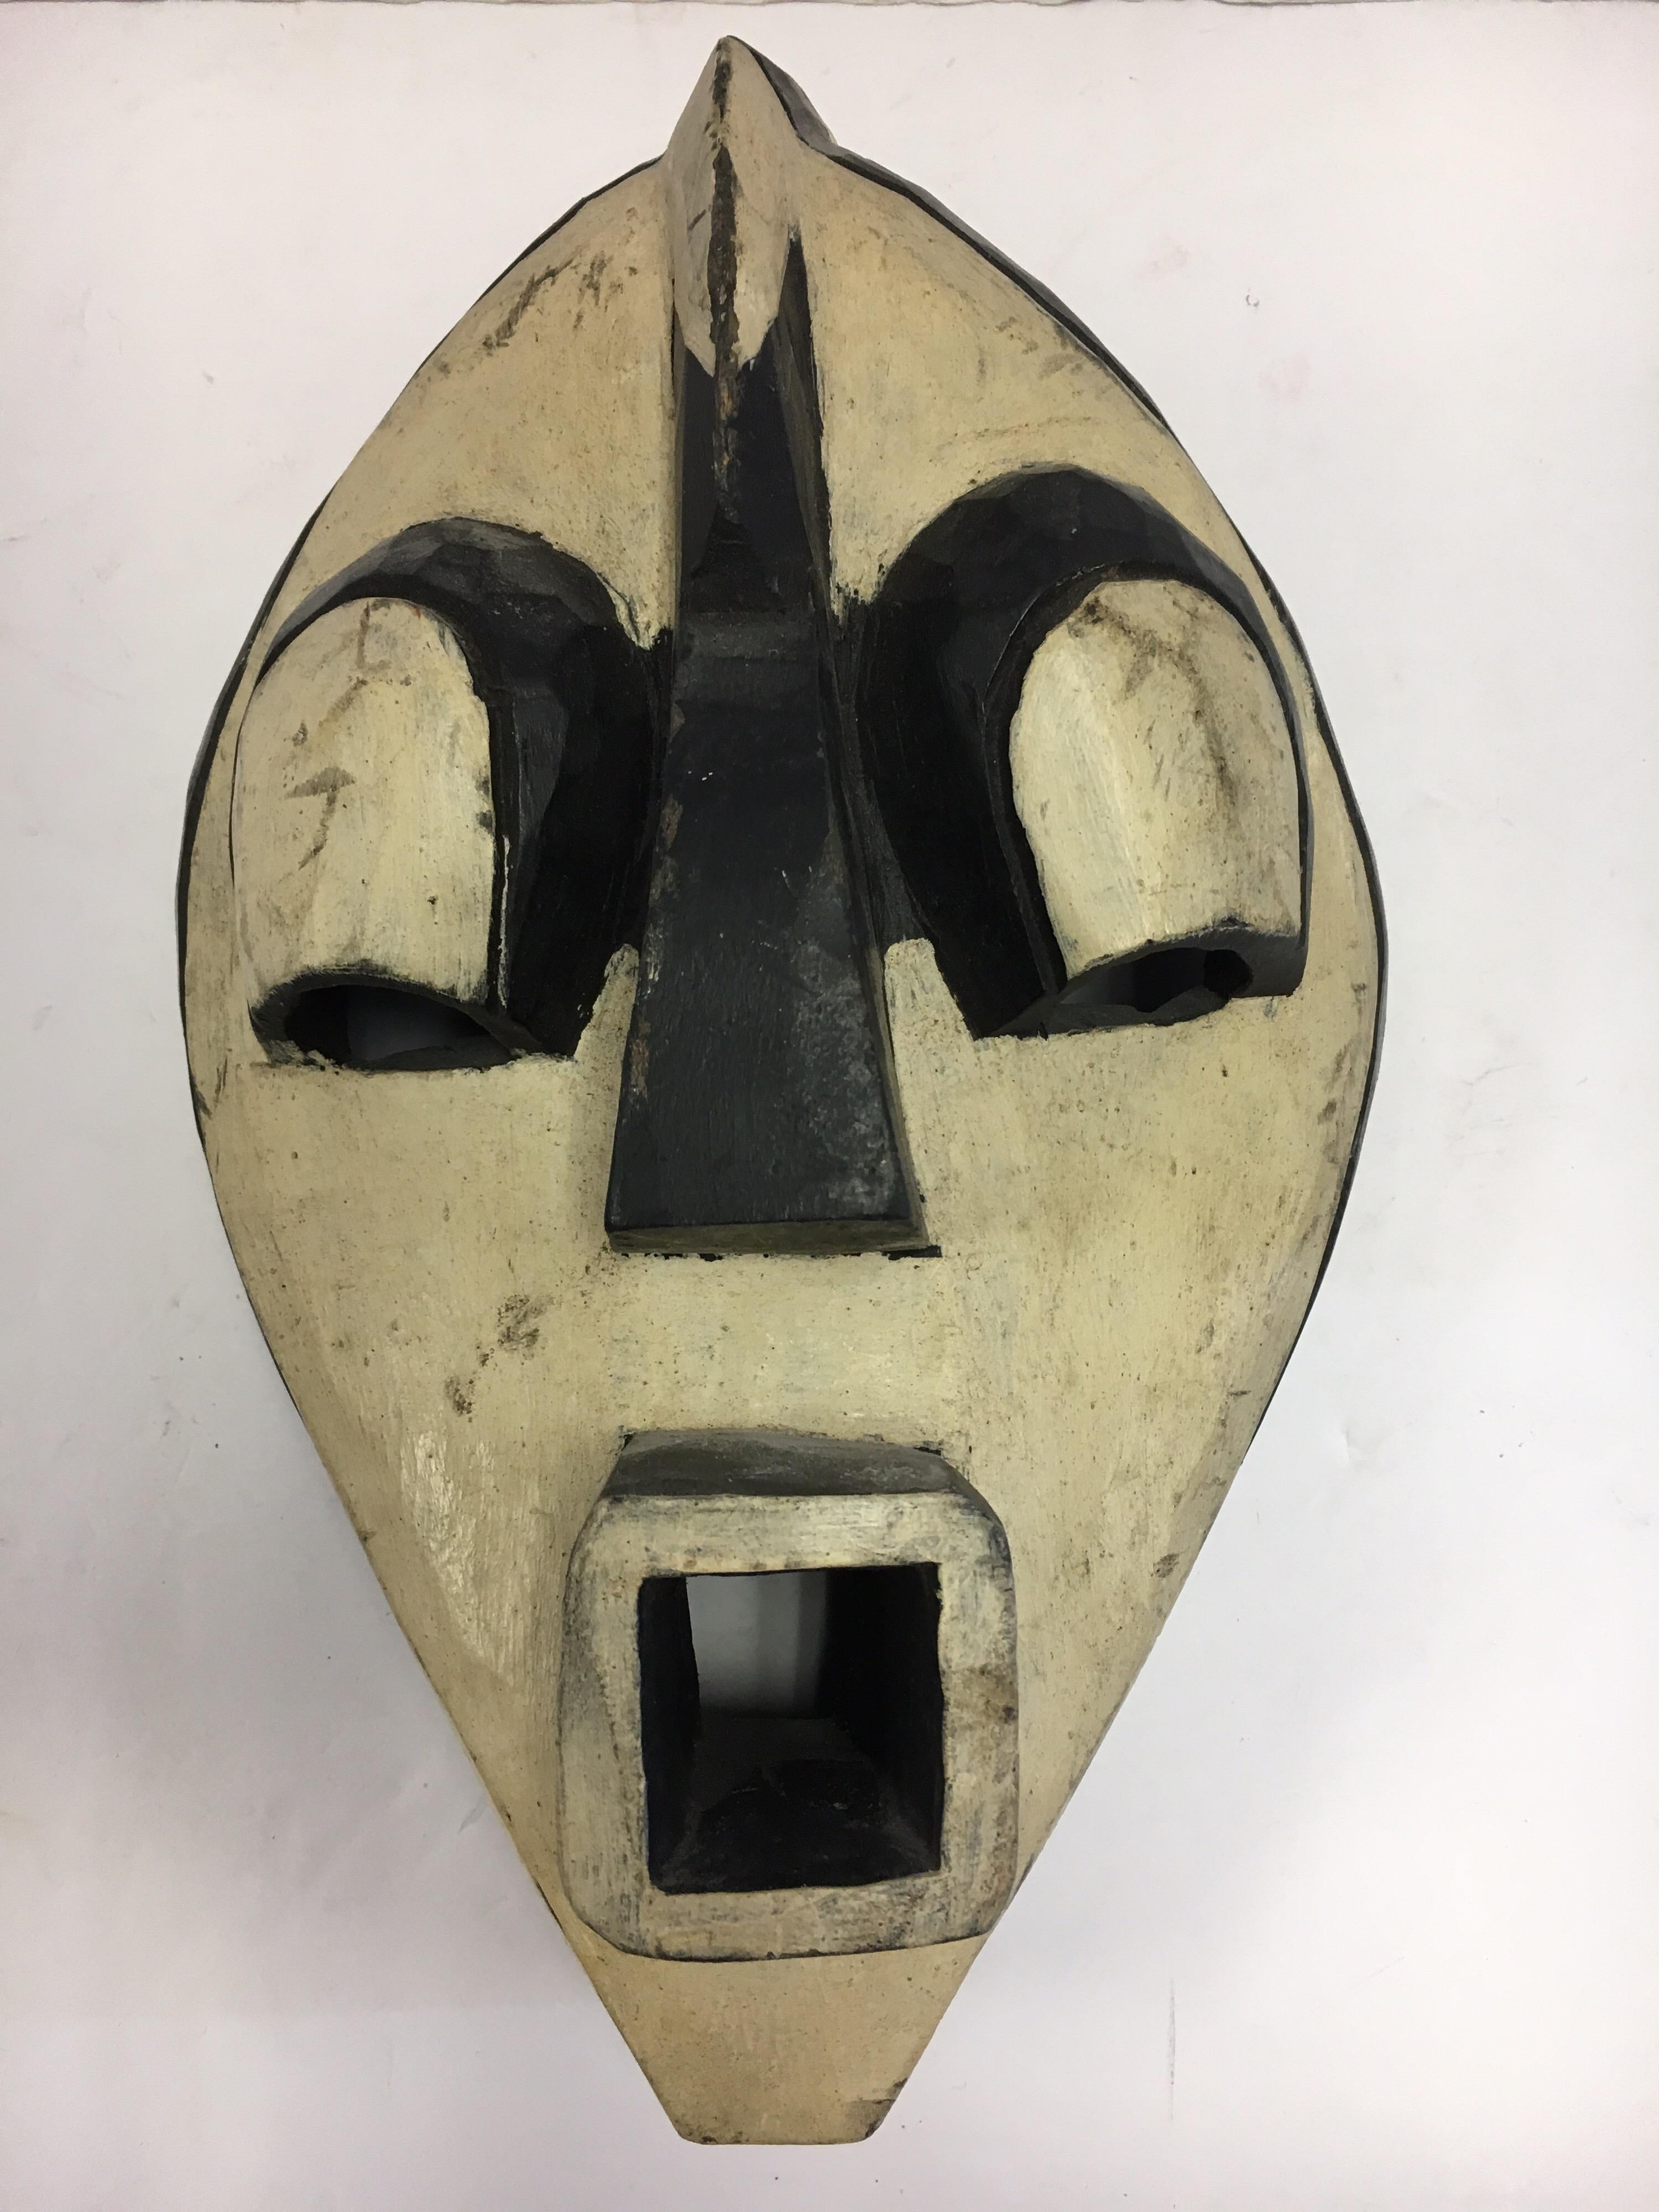 Coveted decorative African hand-carved wood mask with graphic elements, circa 1970s.
This is a decorative item from the 1970s, it was made for export, it is not an antique tribal mask.
It was made by a master carver from a single piece of wood and